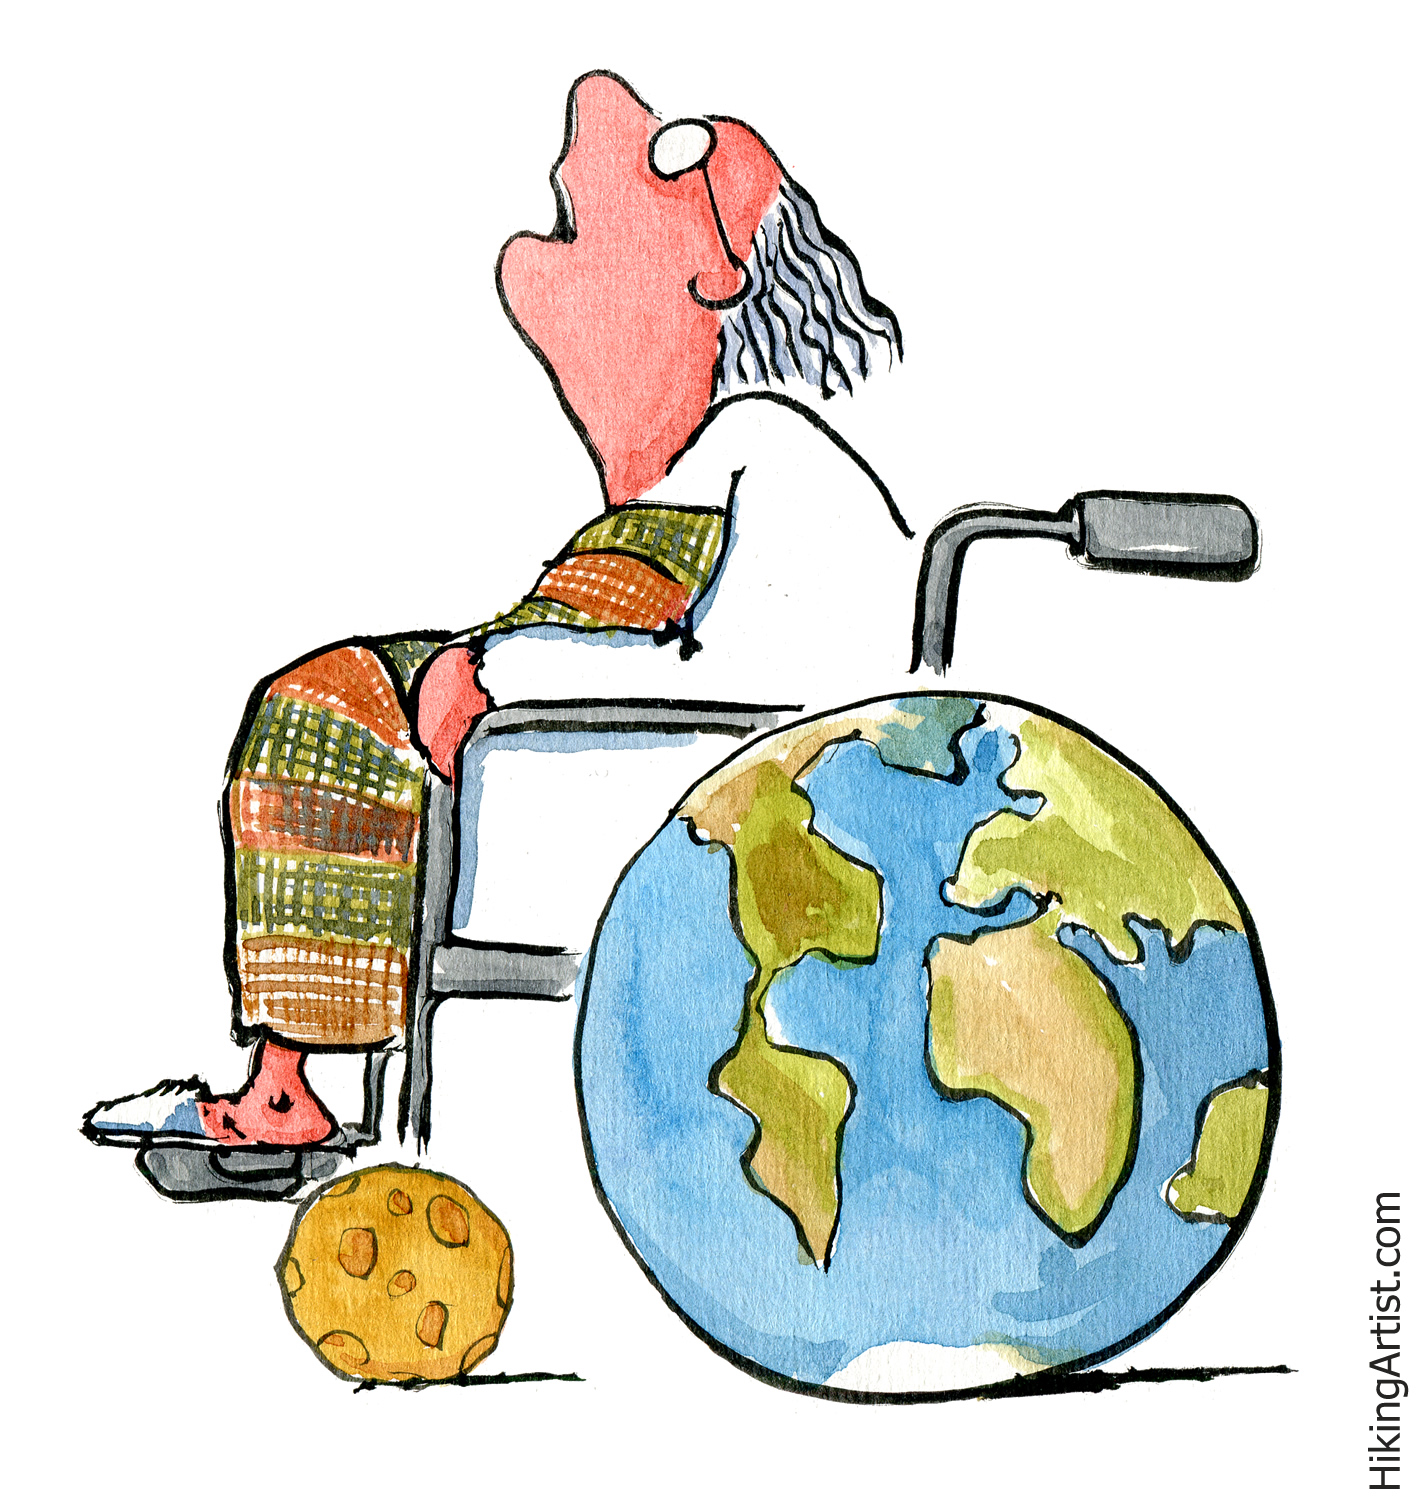 illustration-man-earth-wheelchair-old | My art, thoughts and Notes